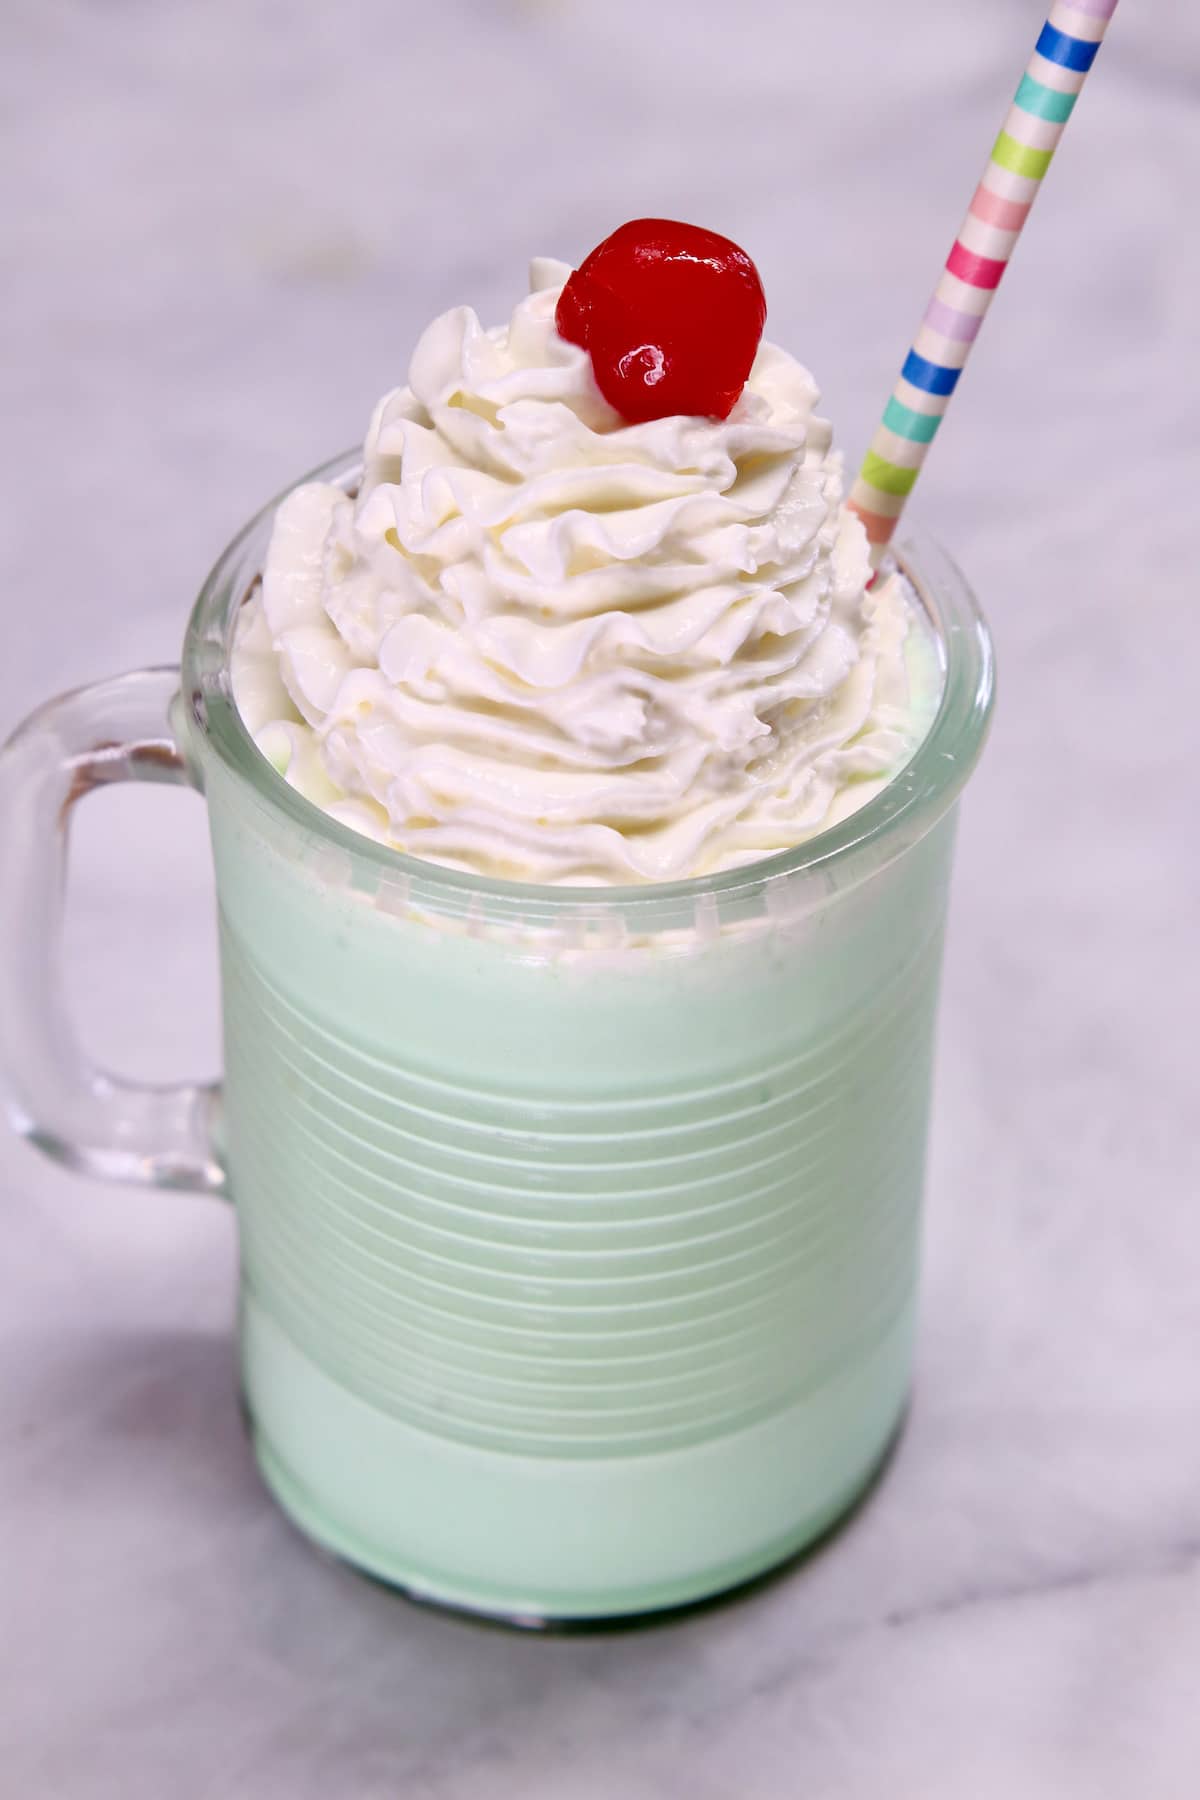 Mint shake with whipped cream, cherry and straw in a glass mug.